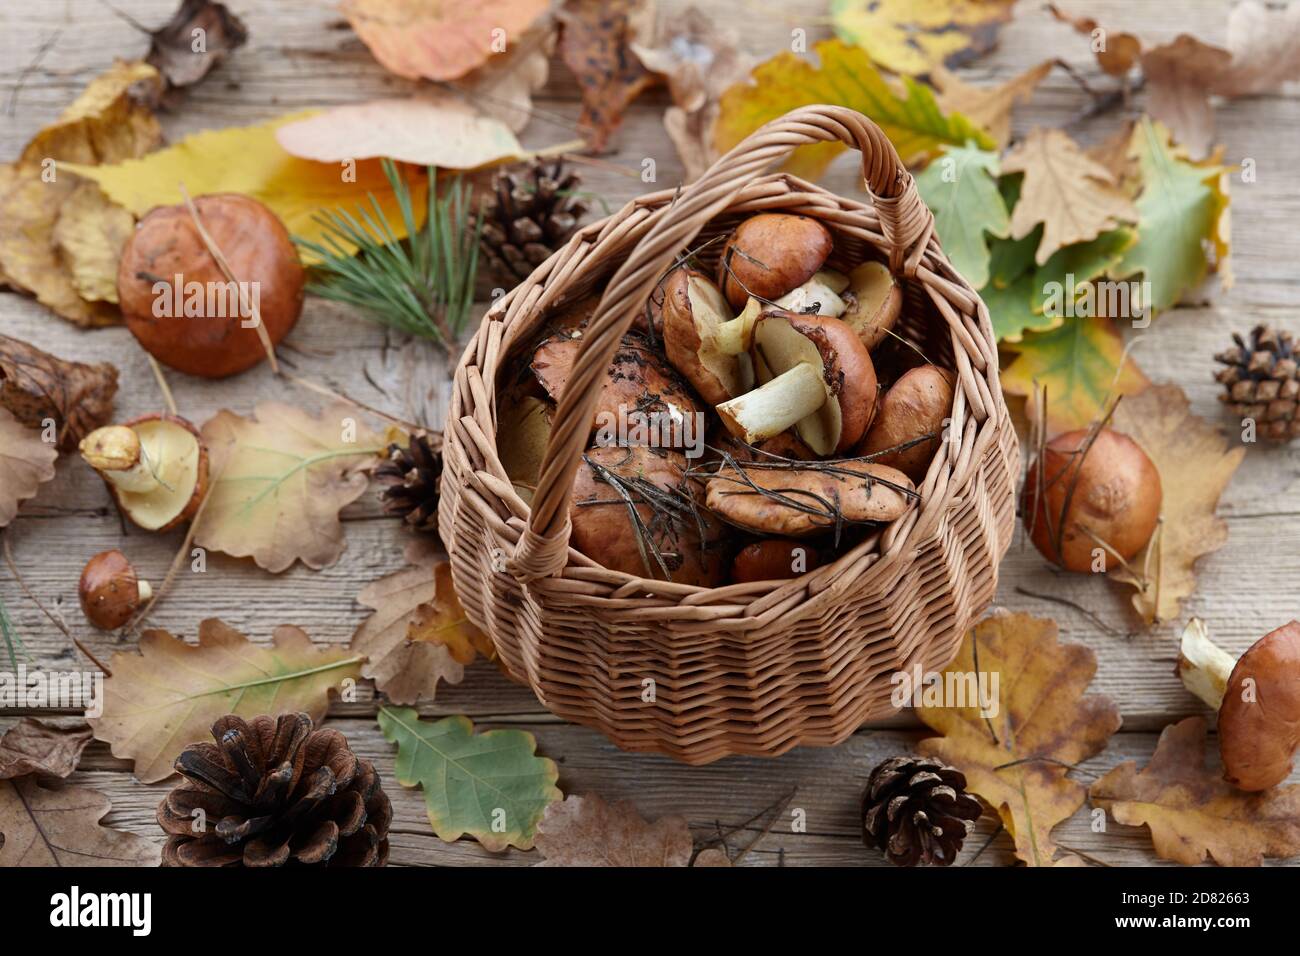 Mushrooms basket and autumn leaves on wooden background, copy space Stock Photo